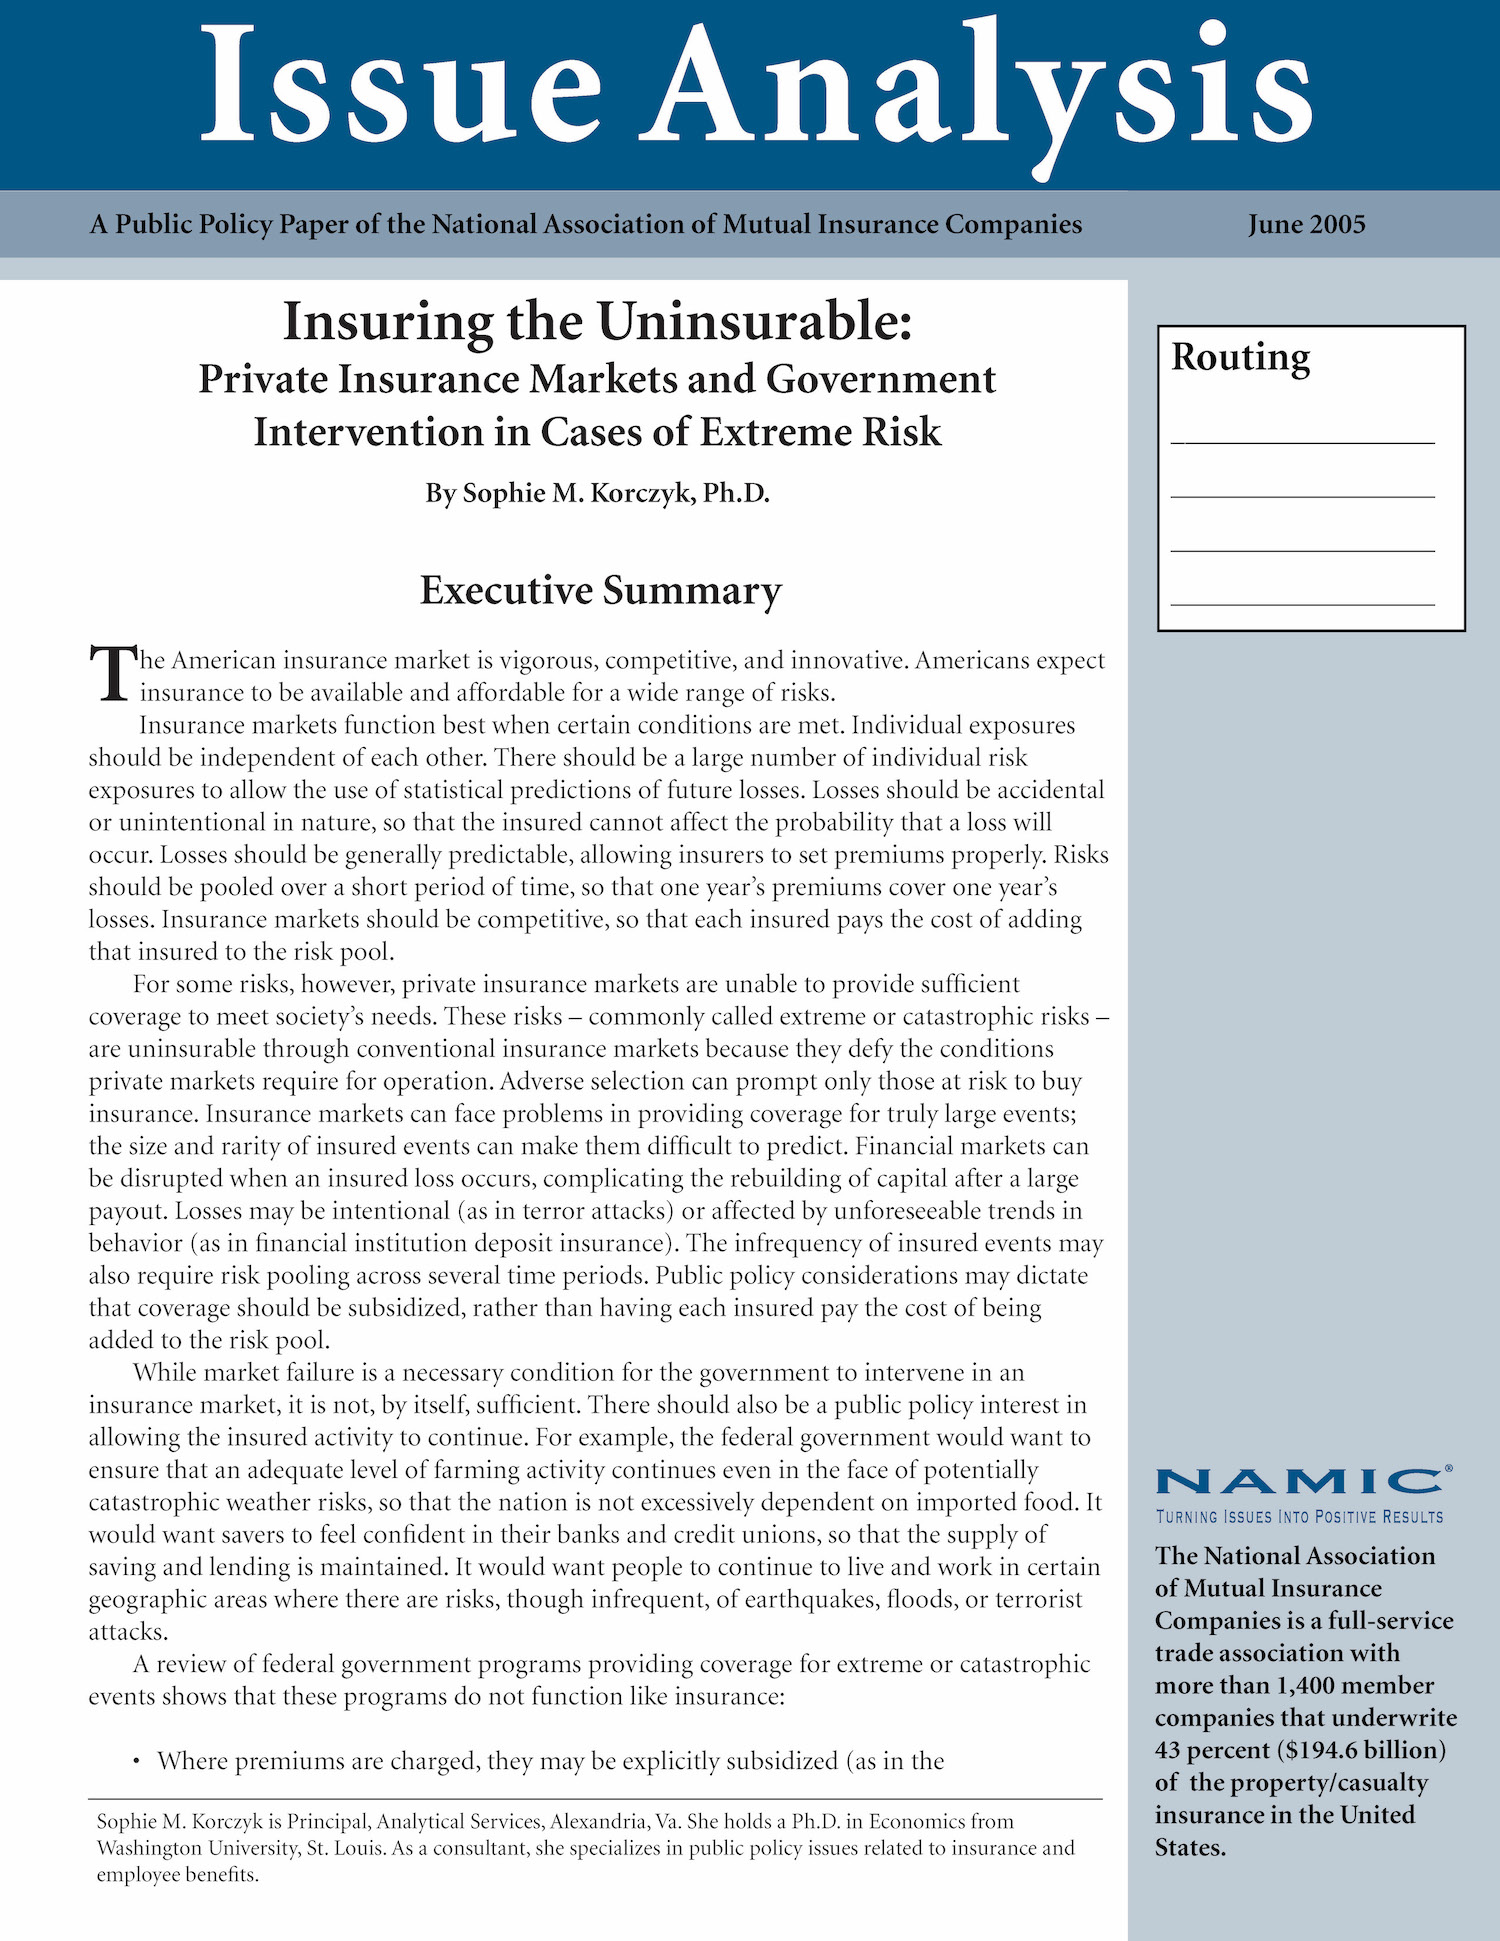 Insuring the Uninsurable: Private Insurance Markets and Government Intervention in Cases of Extreme Risk PDF